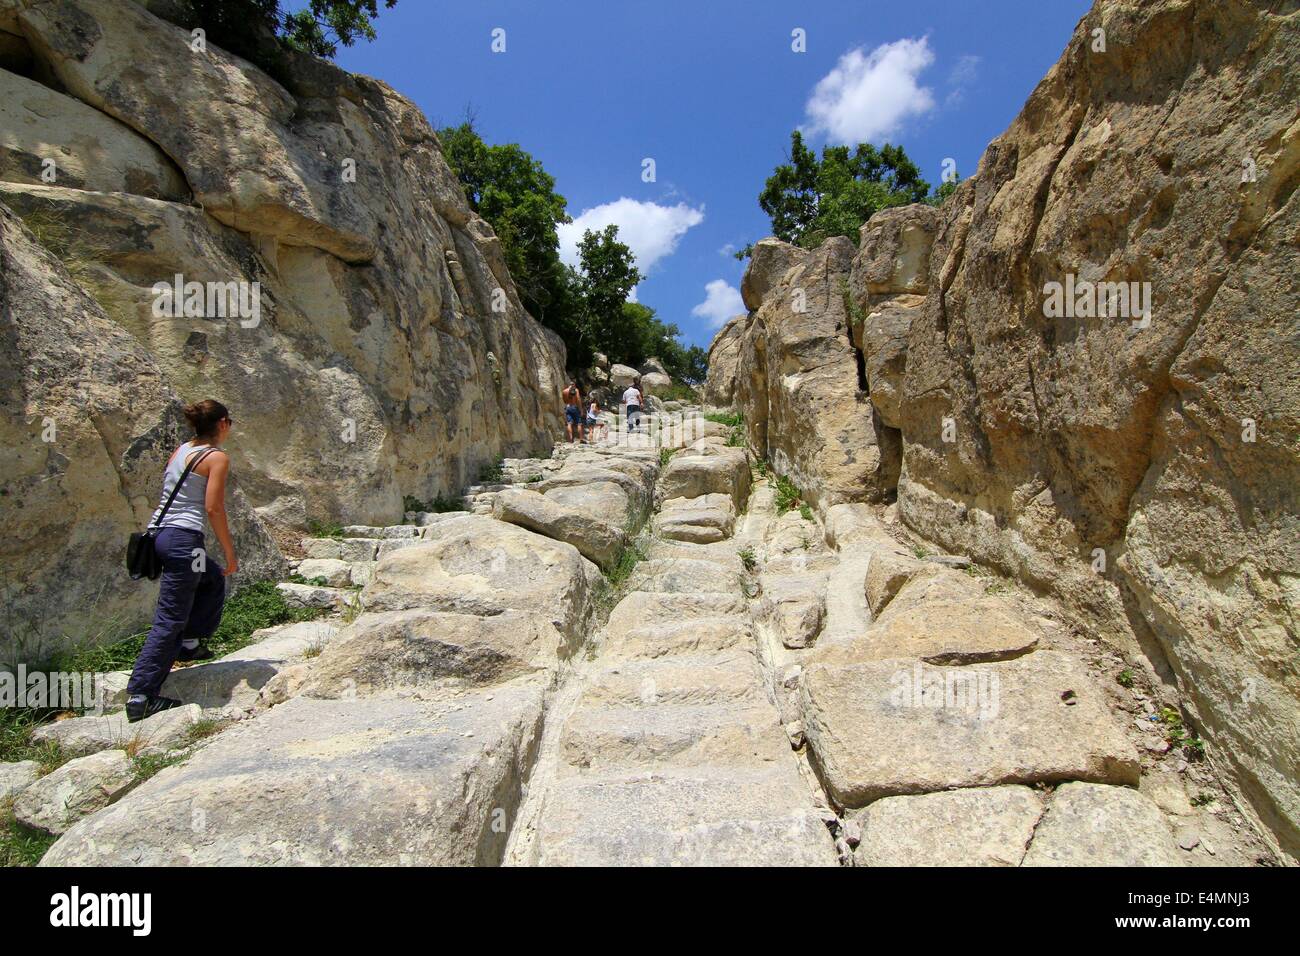 July 13, 2014 - Perperikon, BGR - People attend at the Thracian ancient monumental  archaeological complex Perperikon south-east of the Bulgarian capital Sofia, Sunday, July, 13, 2014. Perperikon is one of the most ancient monumental megalithic structures, entirely carved into the rocks as is one of the most popular tourist destinations in Bulgaria. Religious activity at the top of the cliff began in the 5th century BC. It is associated with the beliefs of the Copper Age people, who started the cult of the sun god. Here they established the first sanctuary and started leaving food containers f Stock Photo